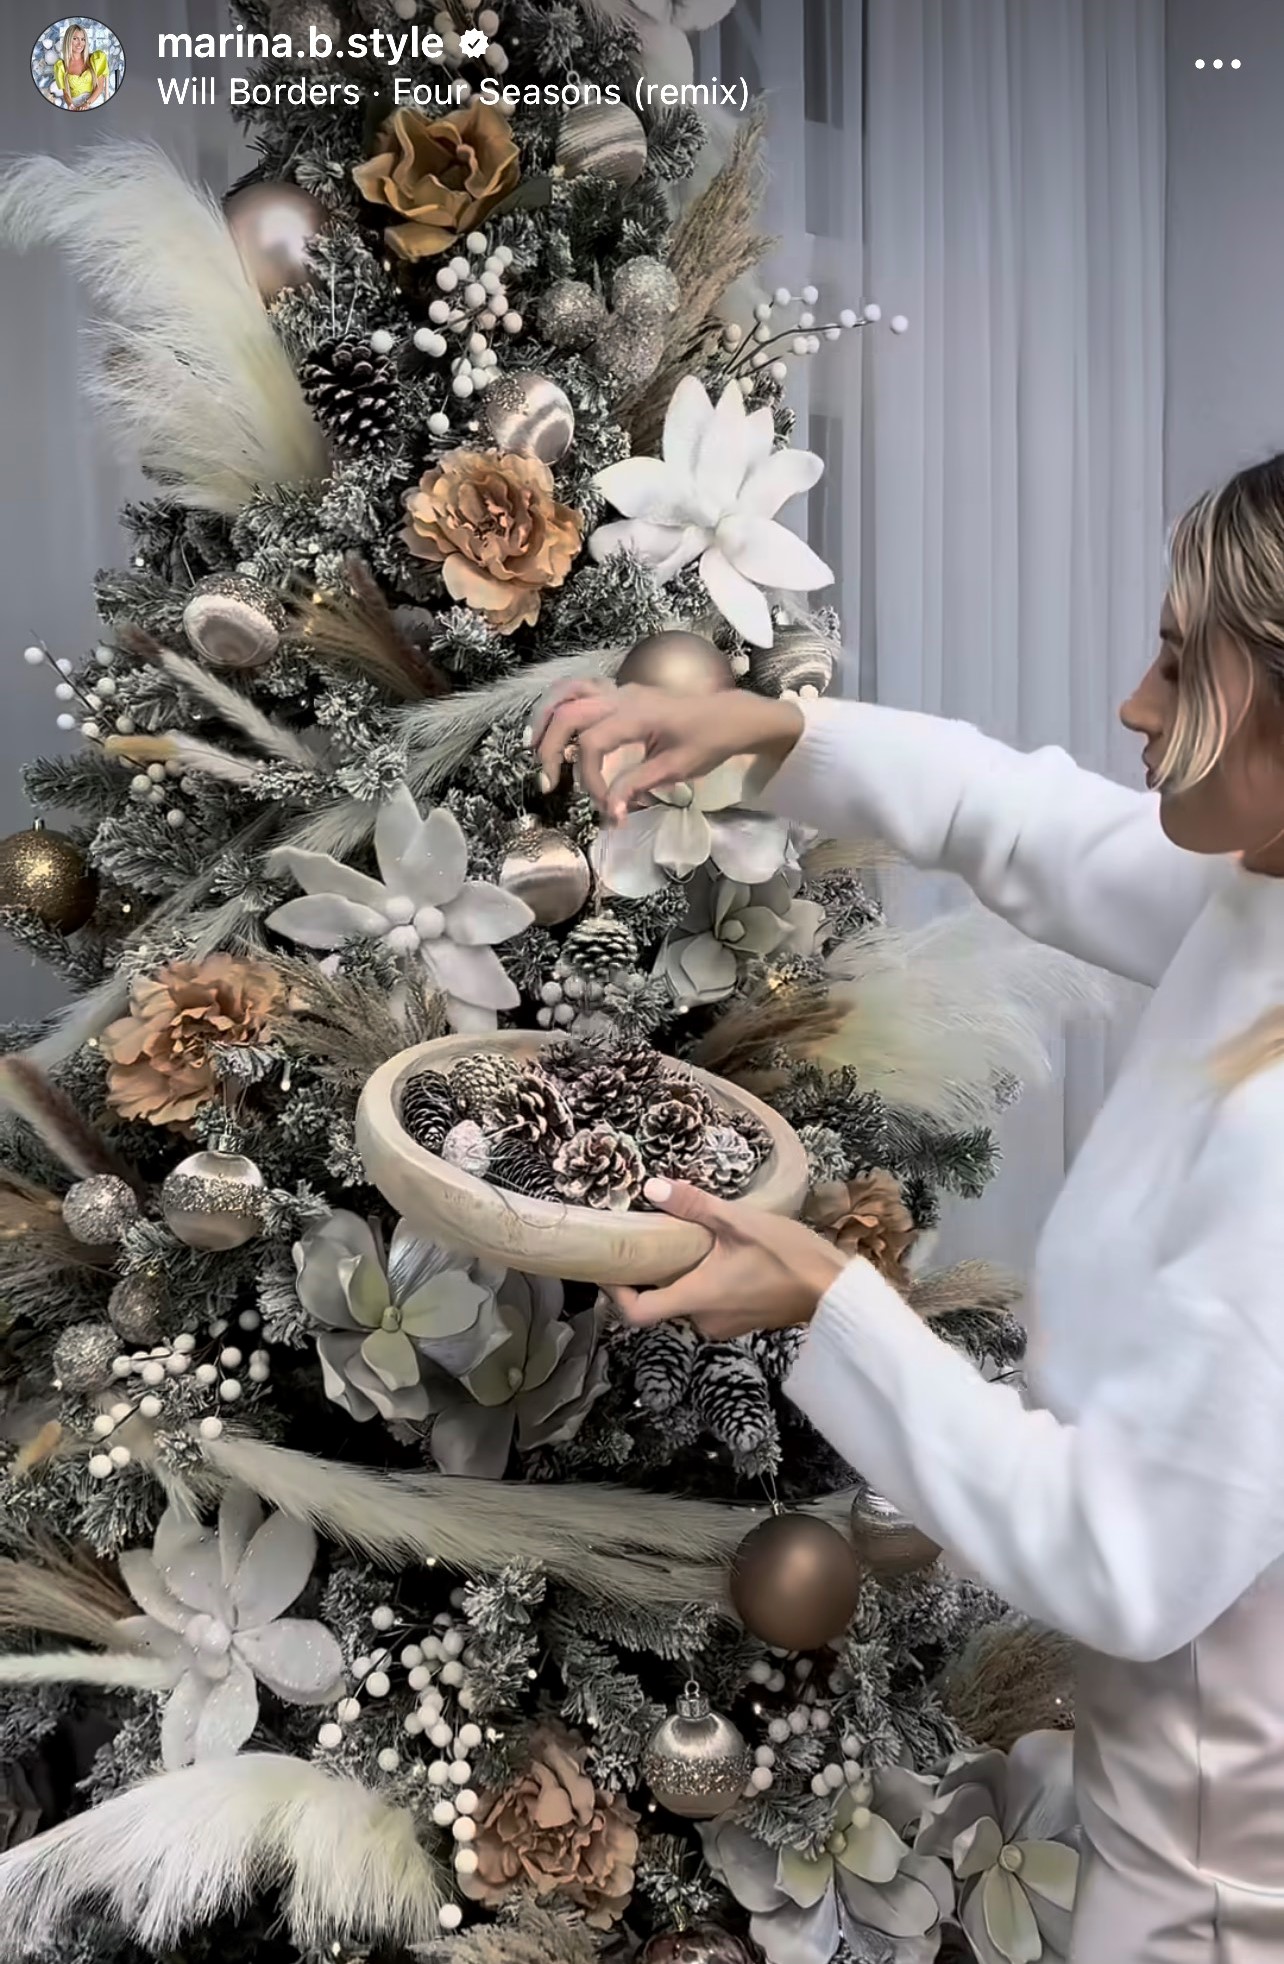 How to Decorate a Christmas Tree in 3 Easy Steps